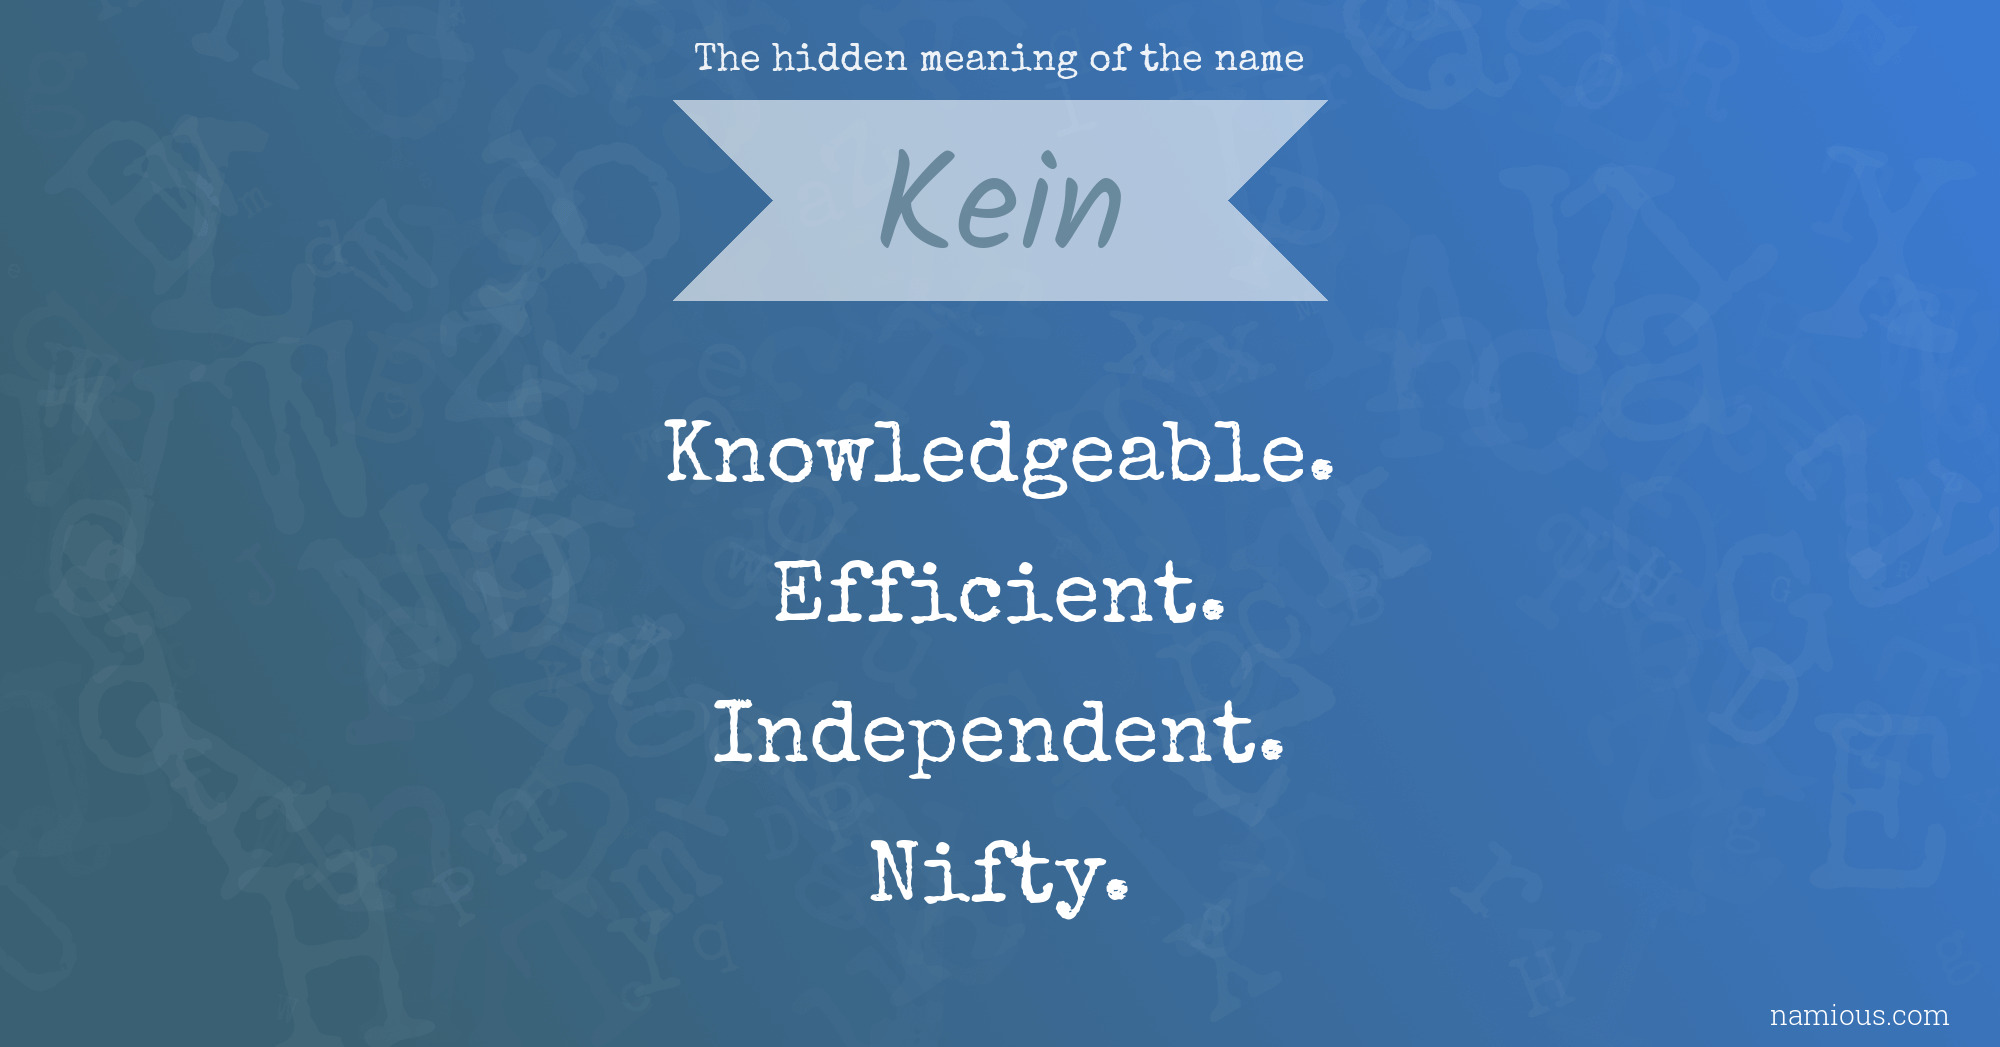 The hidden meaning of the name Kein